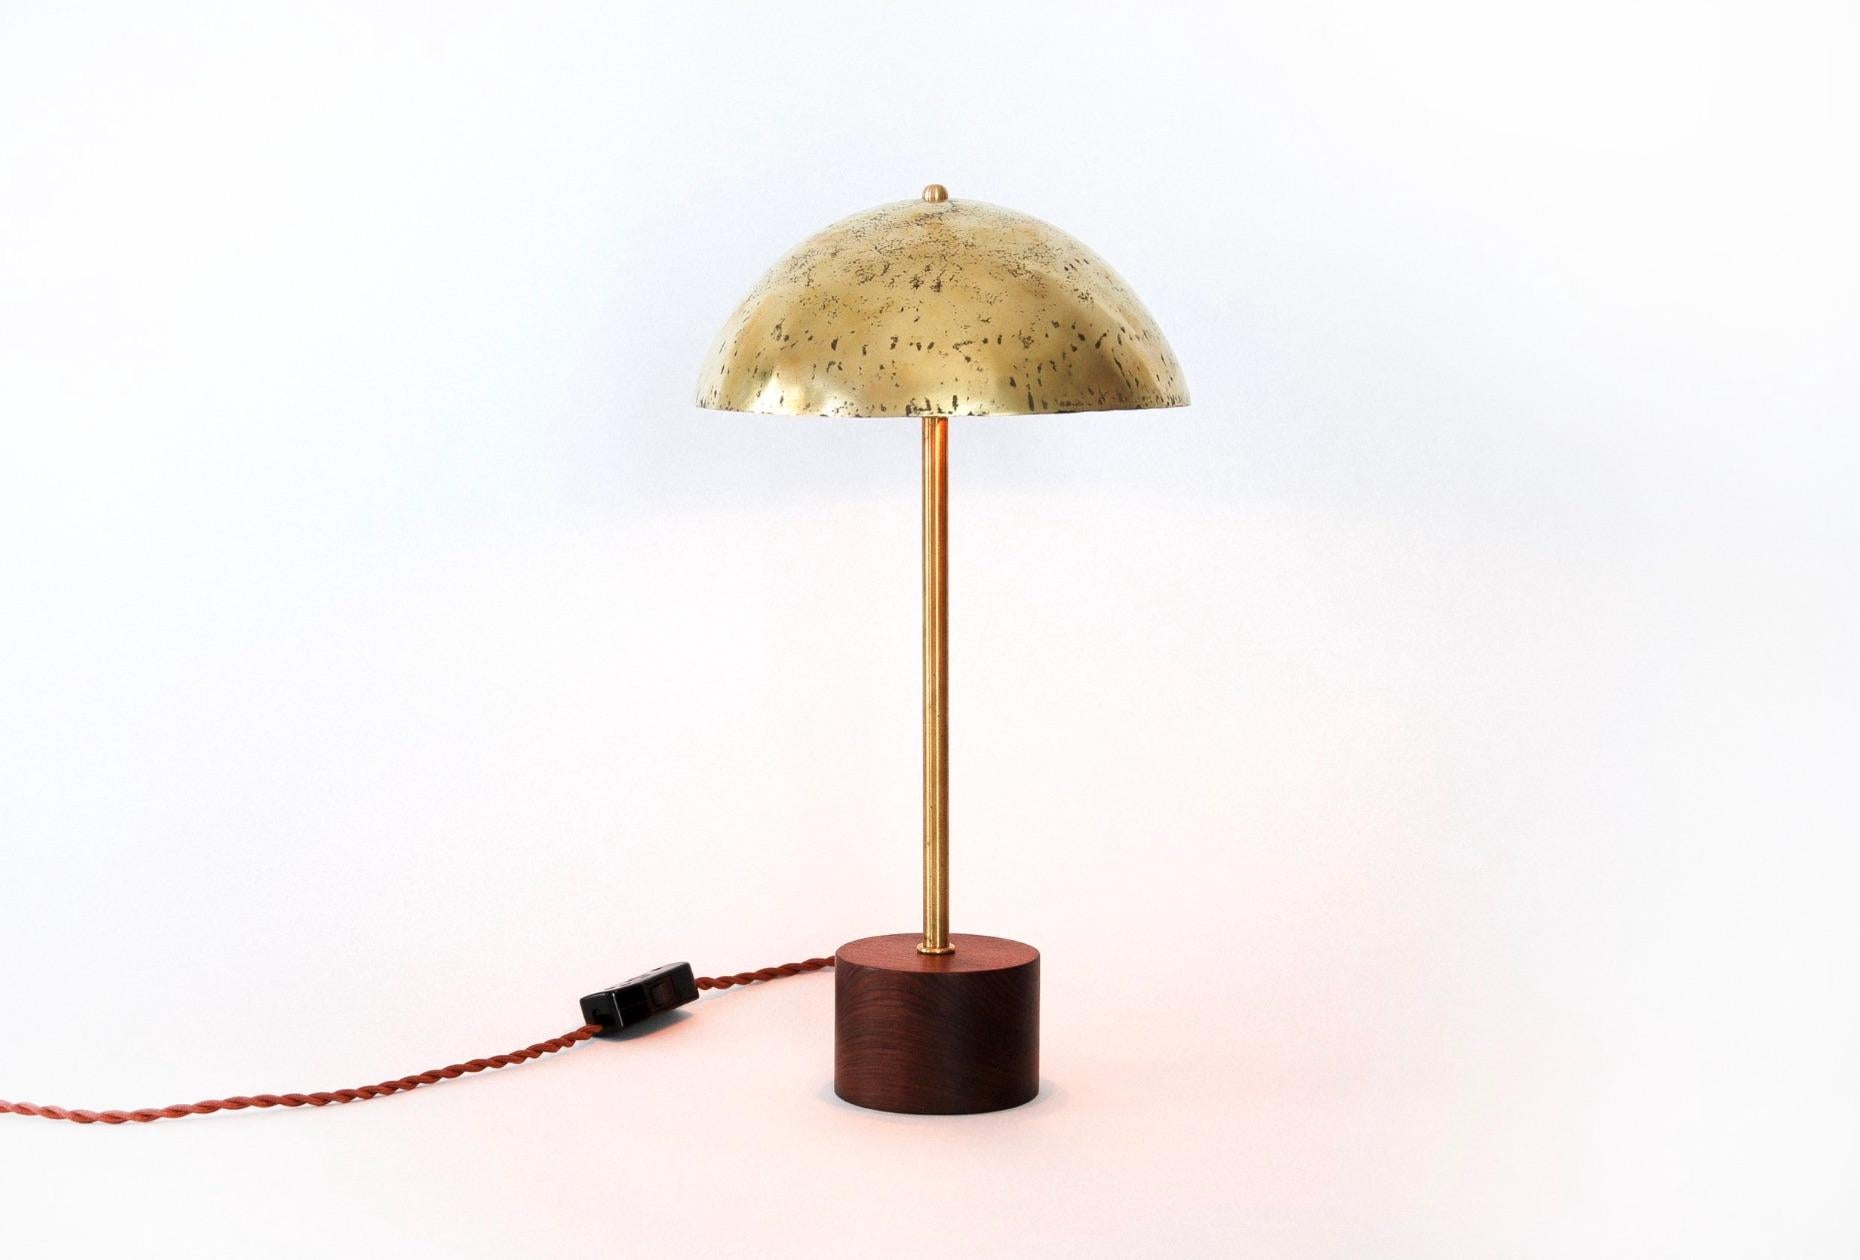 Vera wood and brass table lamp. Hand forged and polished brass shade. Braided 6’ cord. Takes two S14 lightbulbs.

This design, affectionately referred to as the 